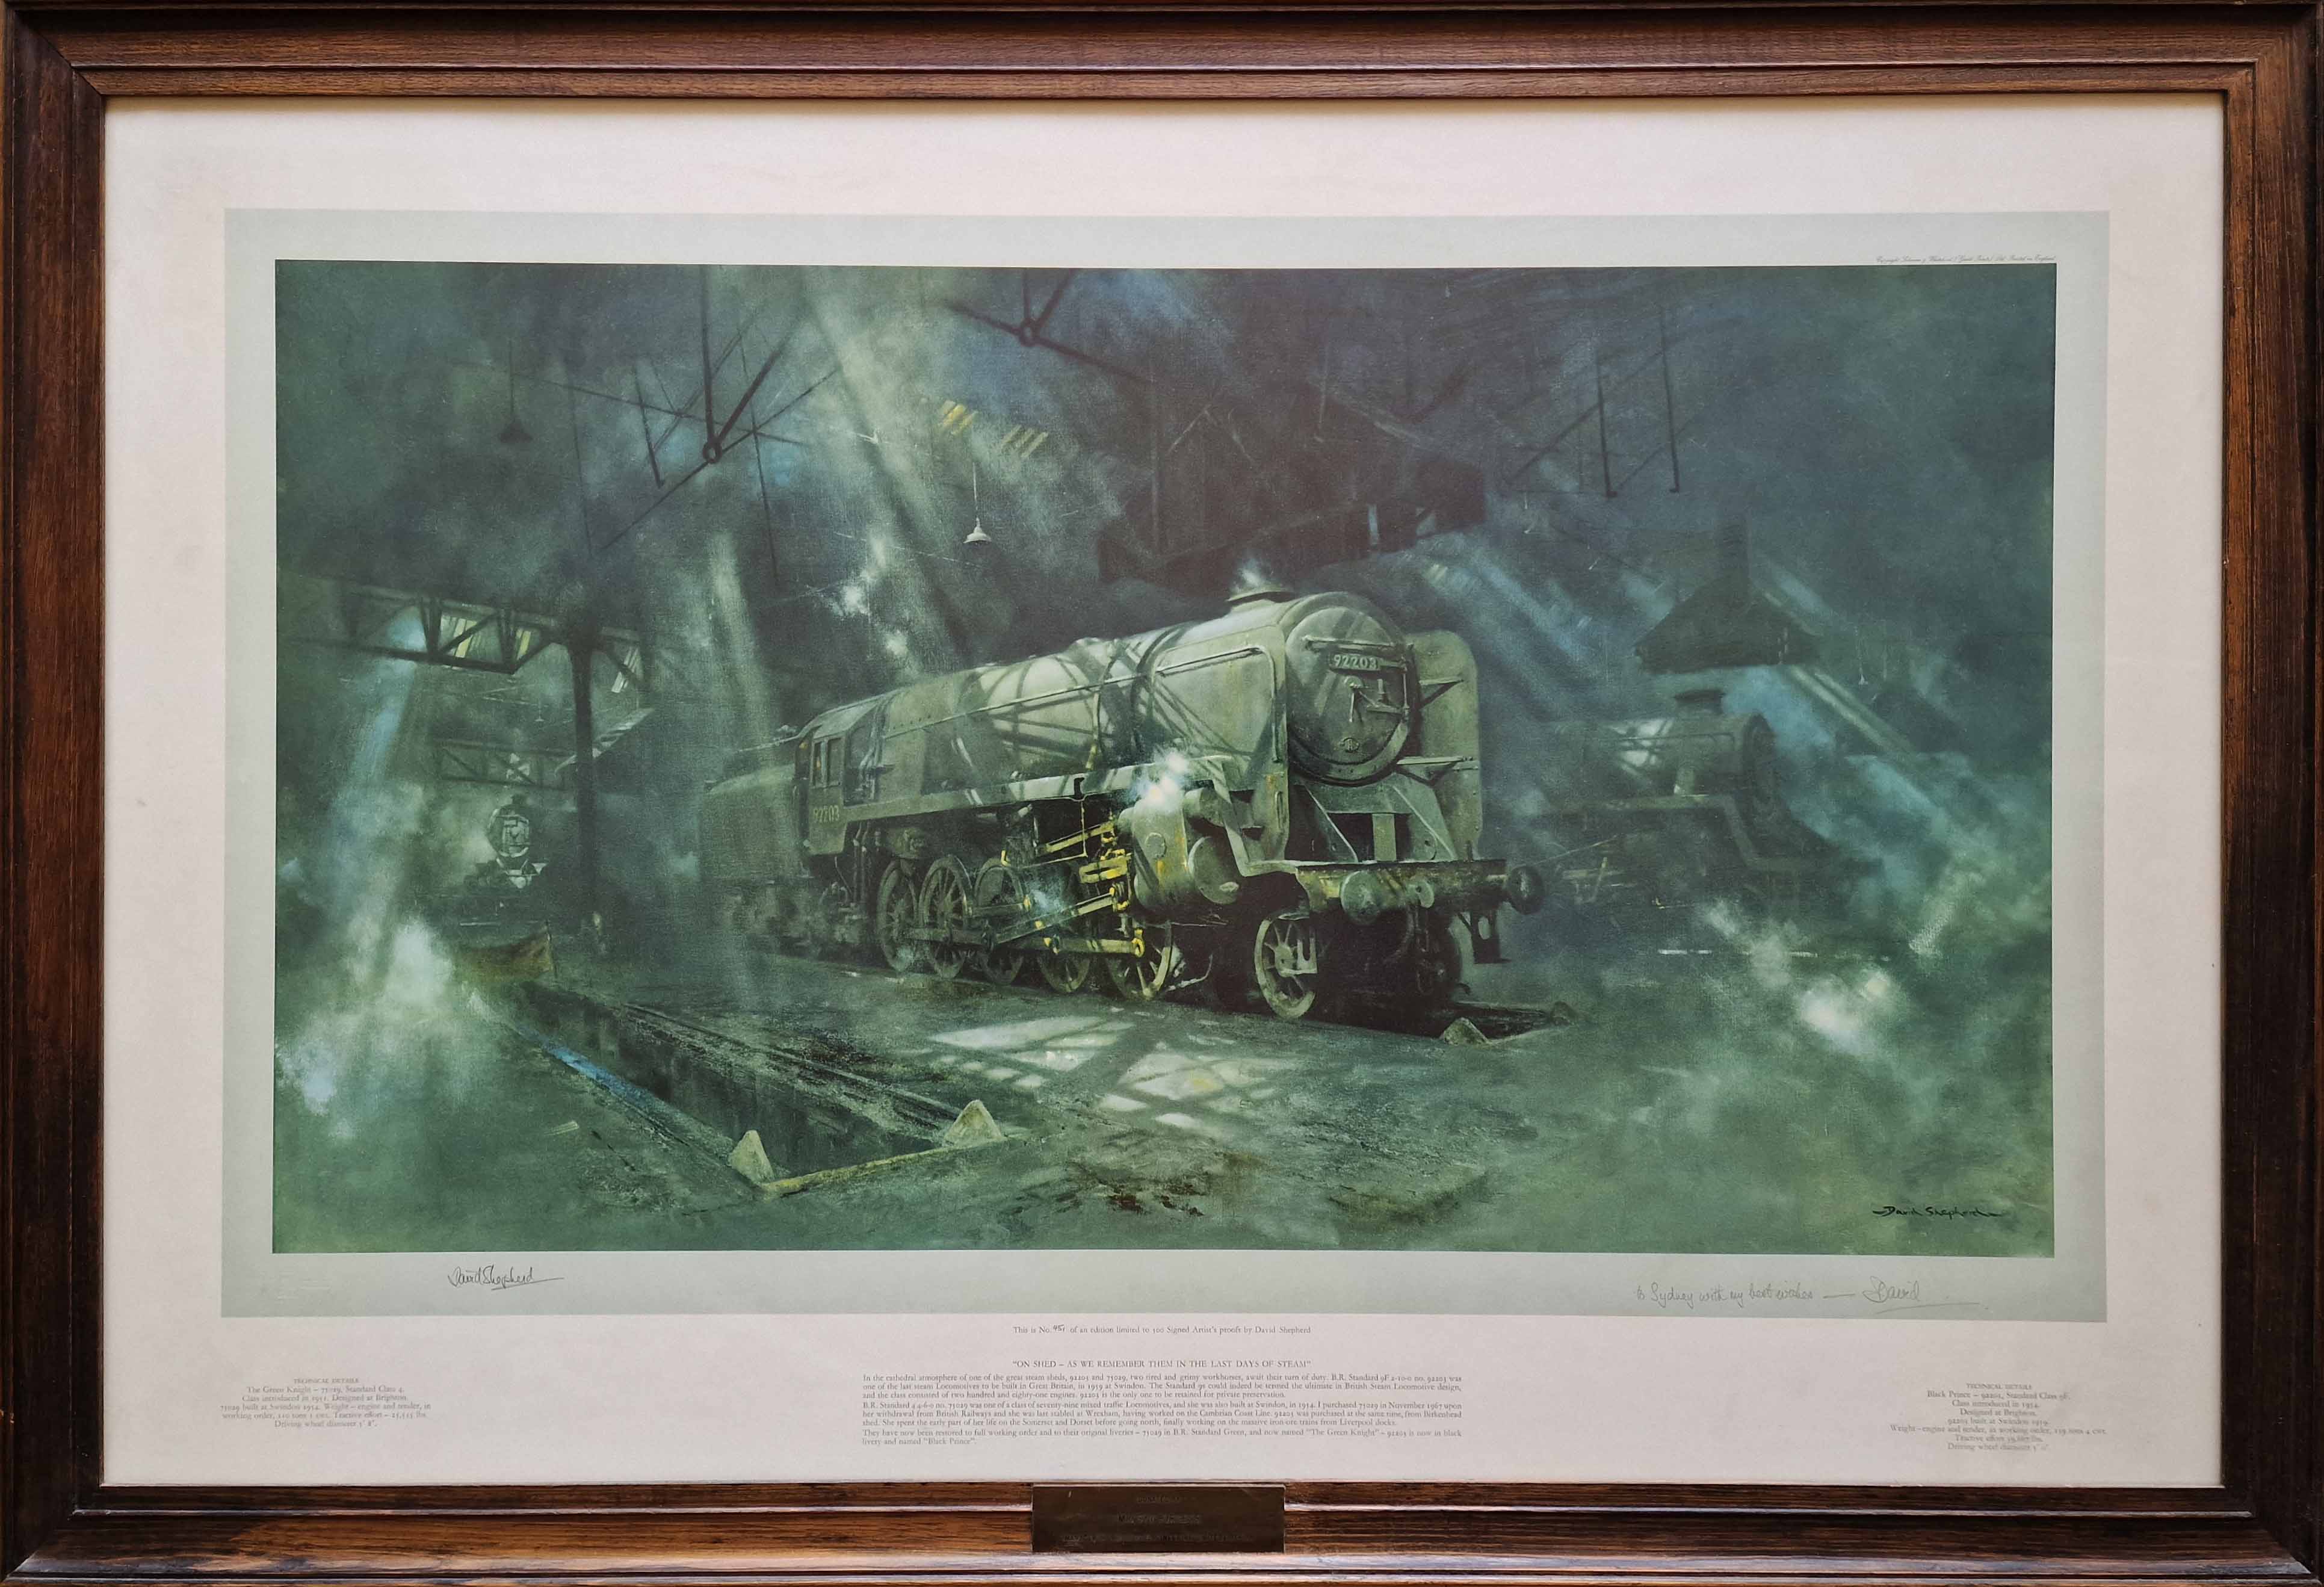 david shepherd,signed limited edition print, on shed, countersigned, framed